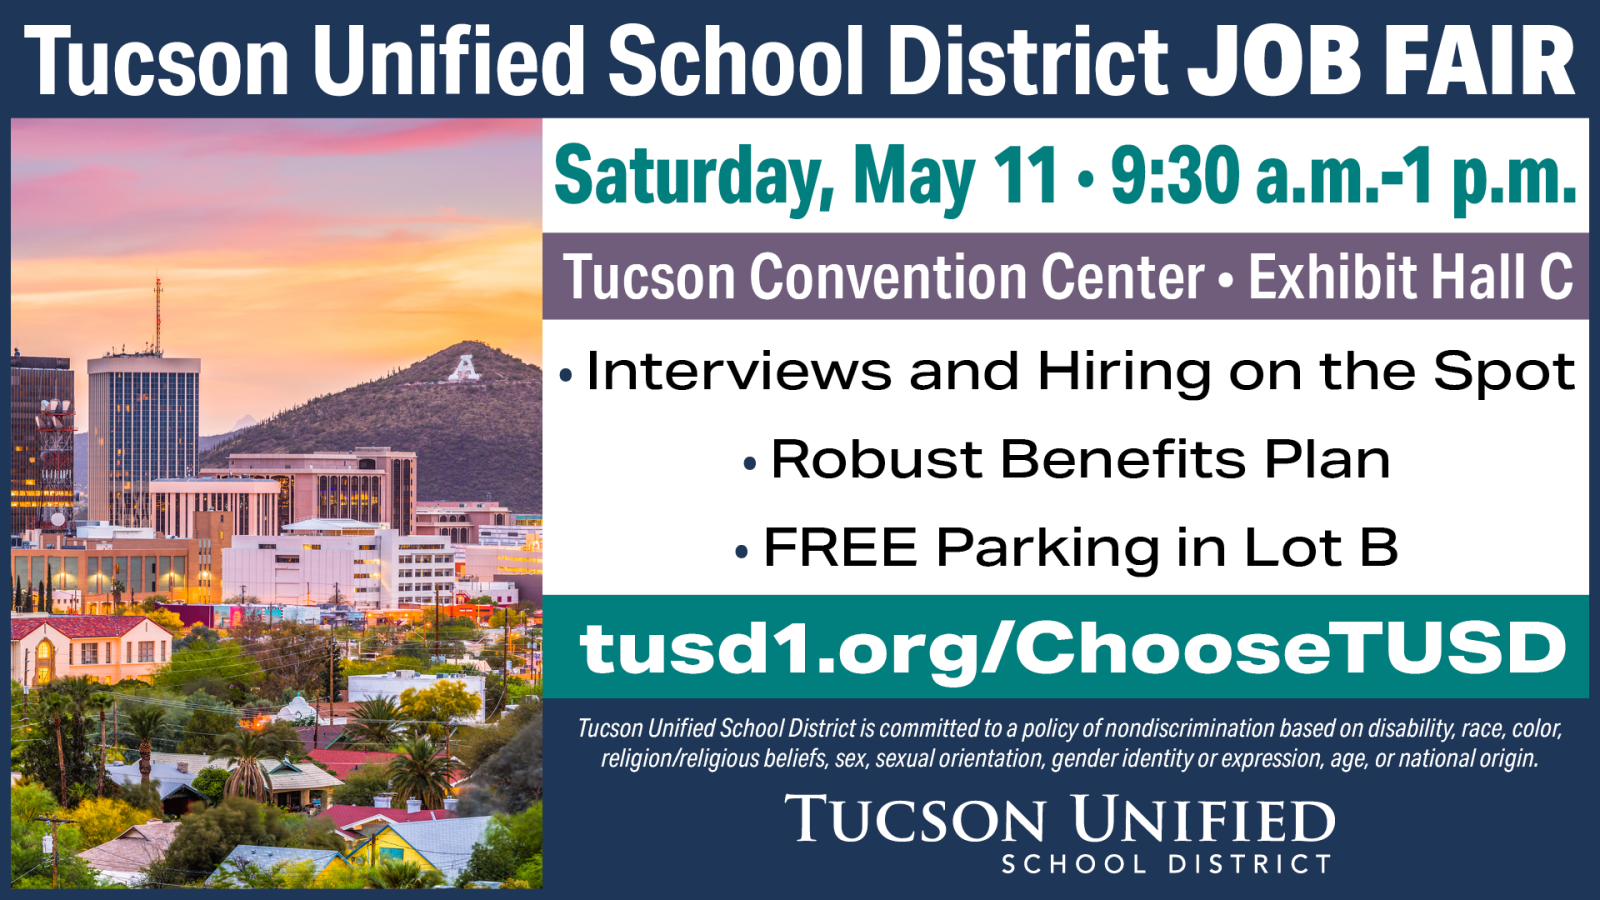 Join us on Saturday May 11 from 9:30 am - 1:00 pm at the Tucson Convention Center Exhibit Hall C (260 S. Church Ave.) for the Tucson Unified School ִ˰appԼ Job Fair!  Interviews and Hiring on the Spot Robust Benefits Plan FREE Parking in Lot B  